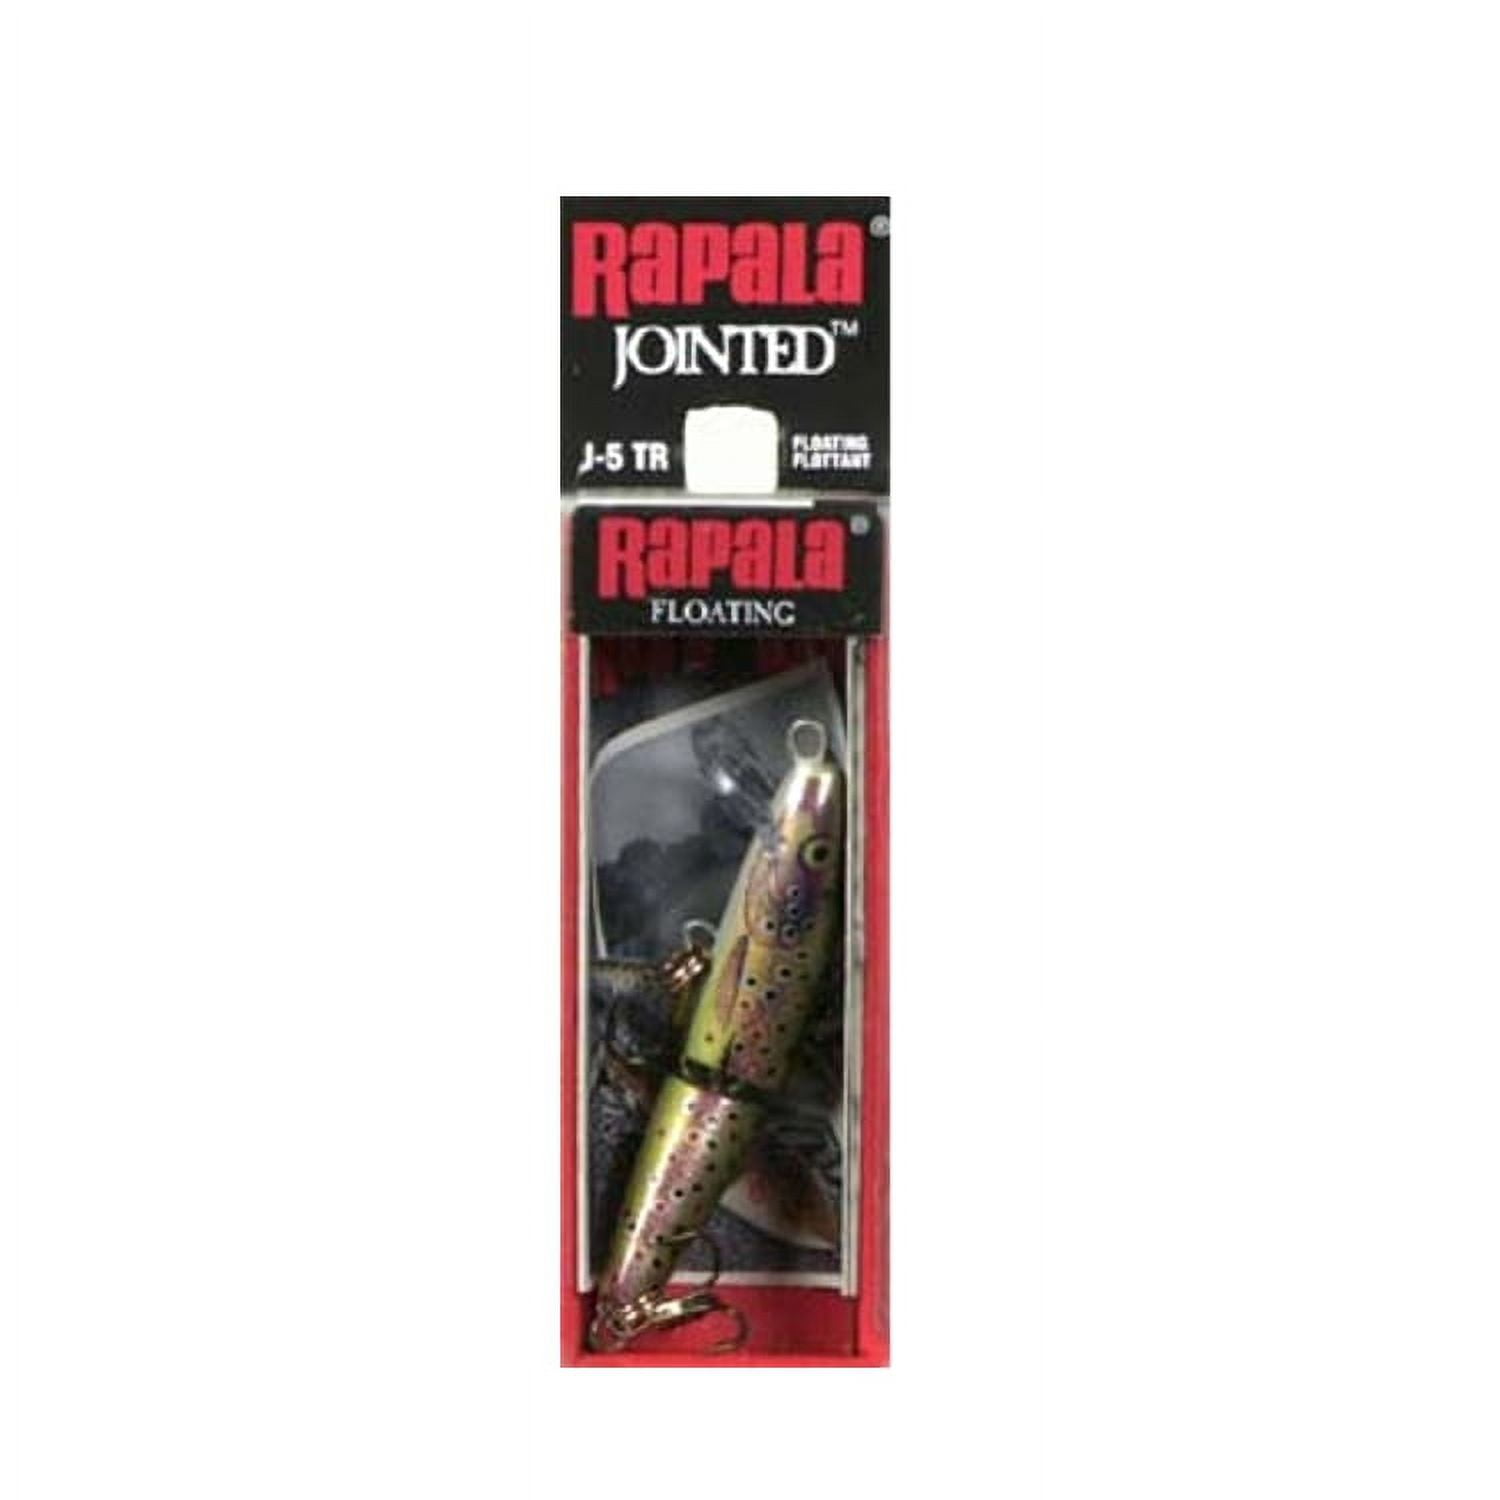 Rapala Jointed (Brown Trout)